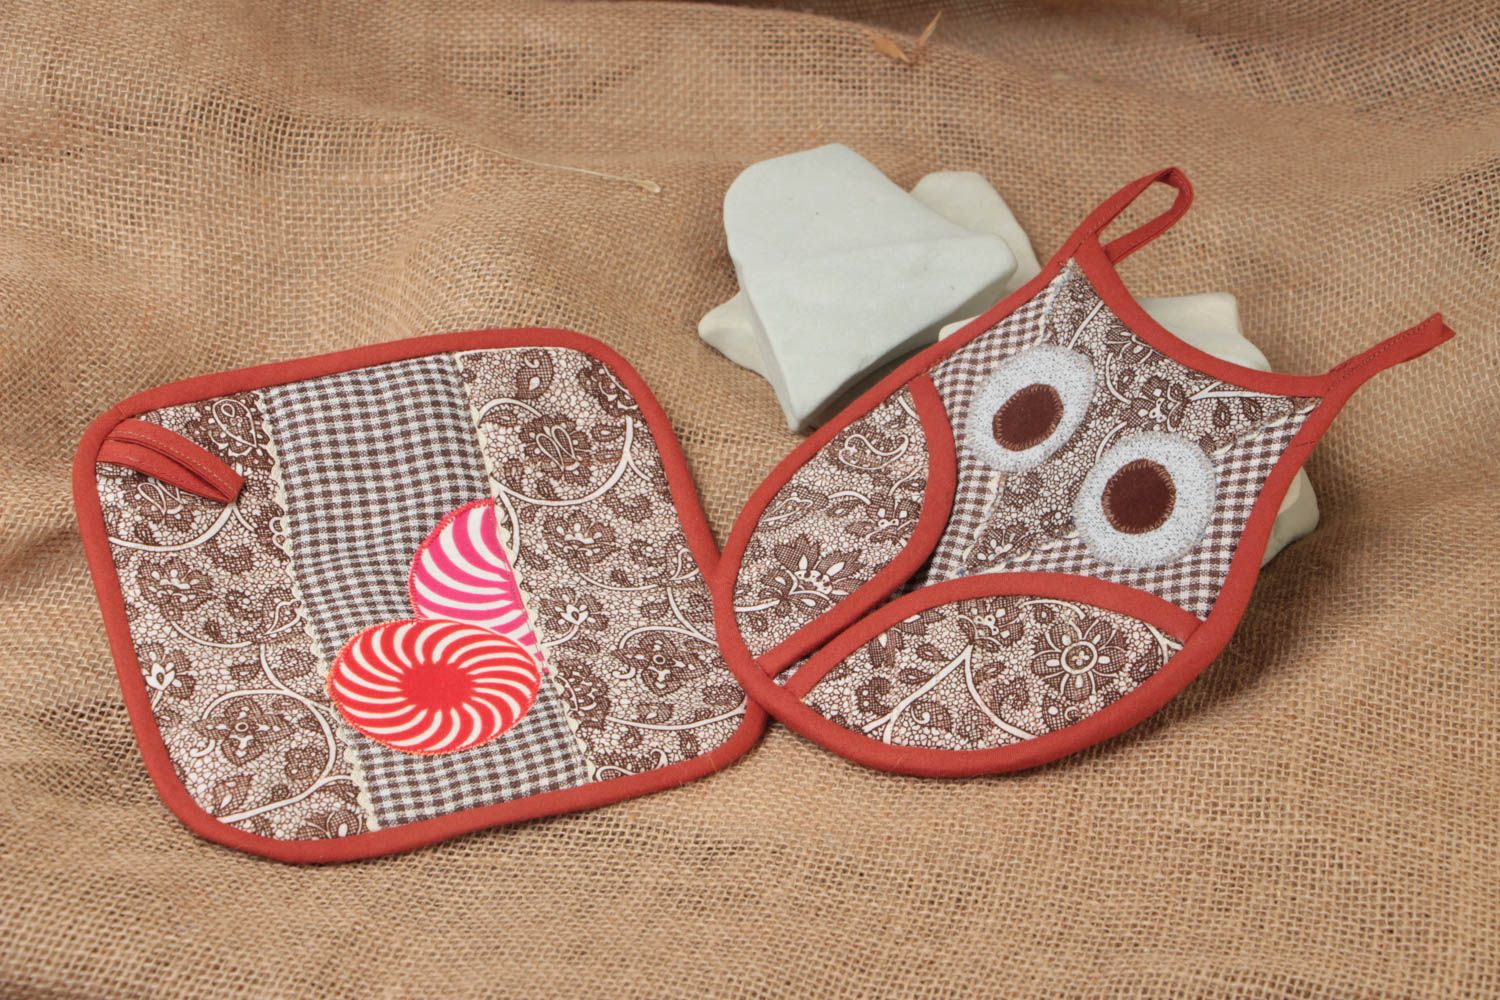 Hot pot holders made of cotton set of handmade kitchen textiles 2 pieces photo 1